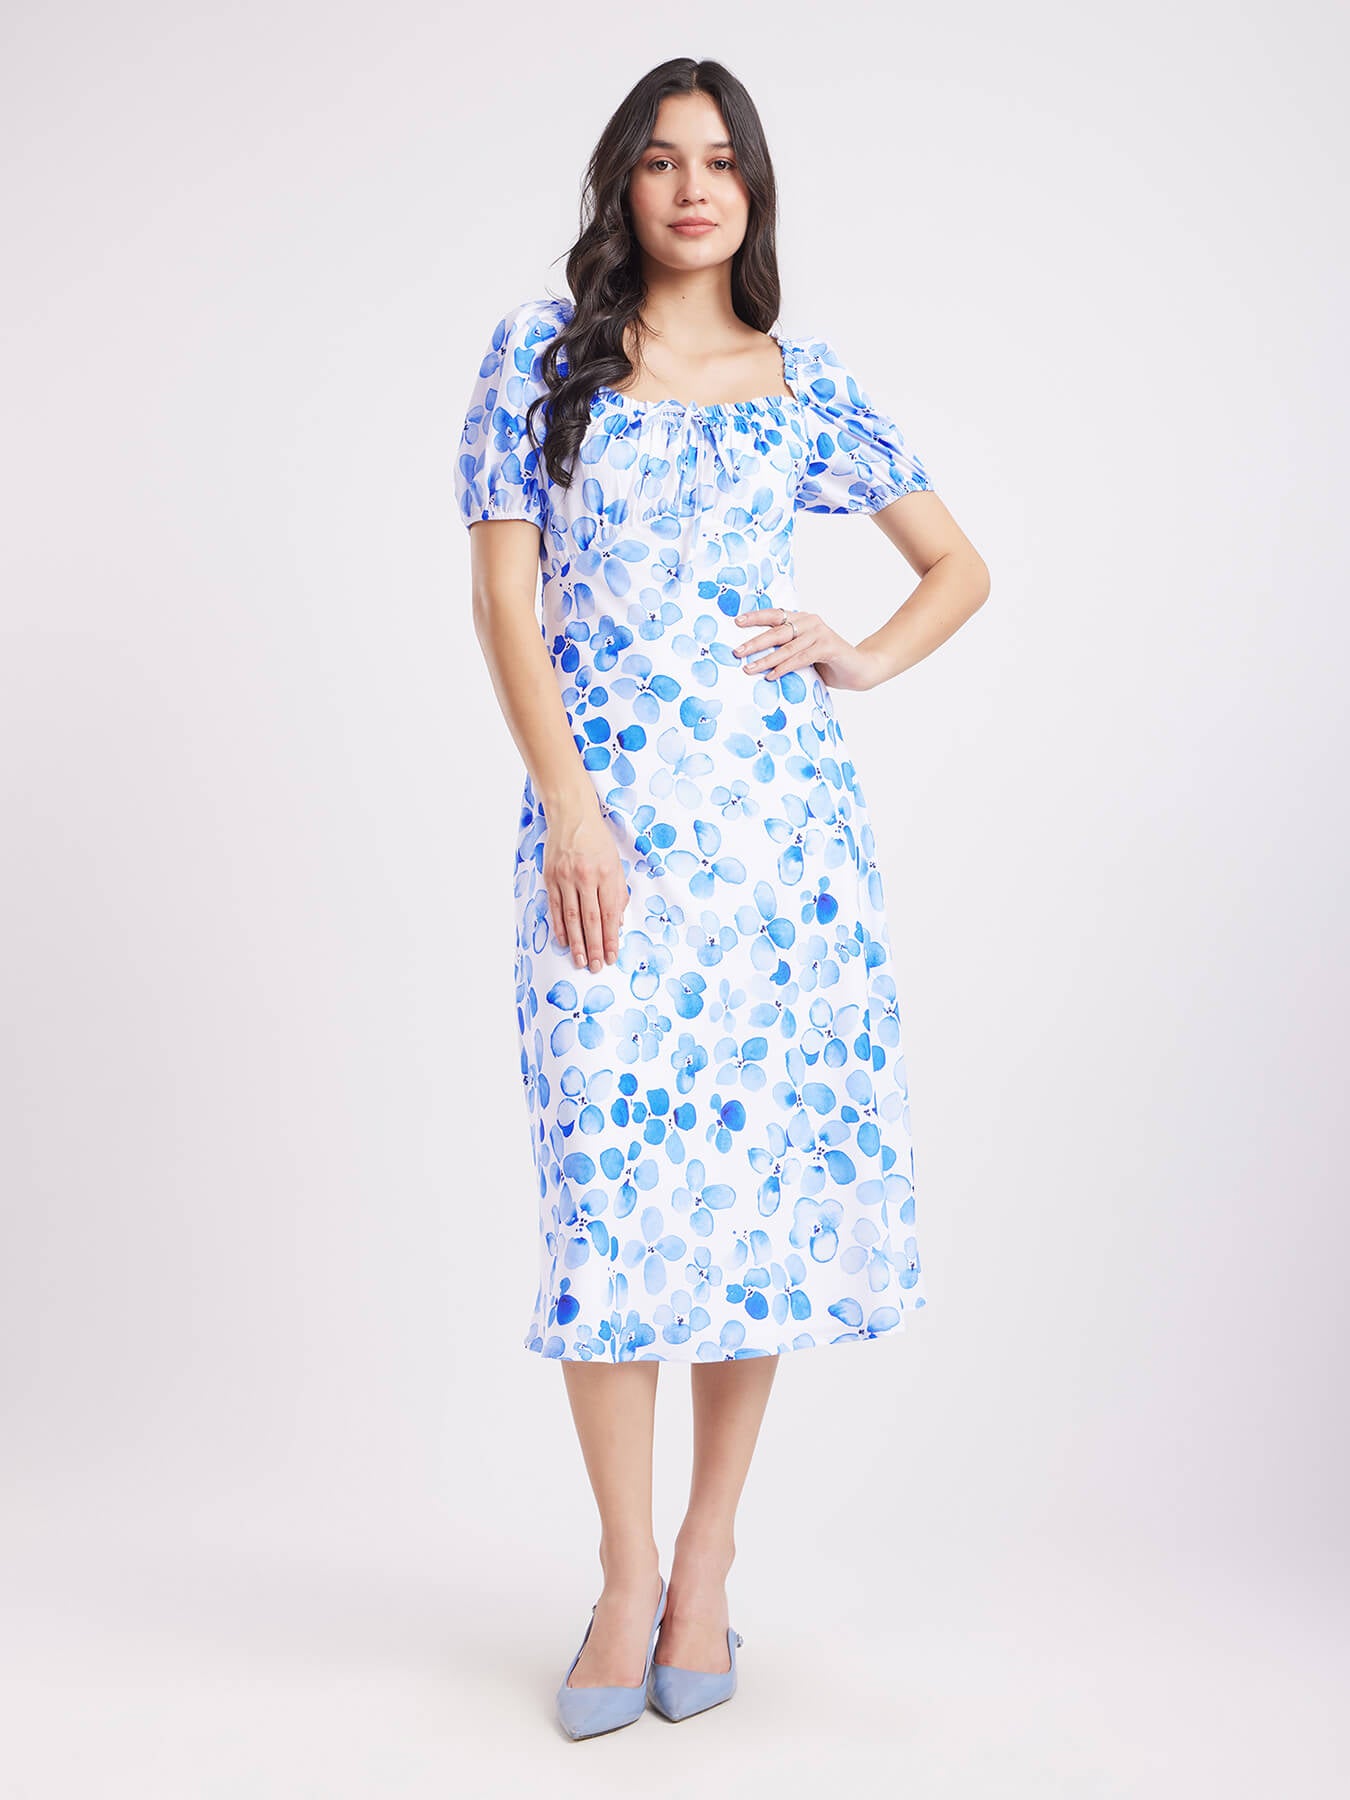 Floral Fit And Flare Dress - Blue And White